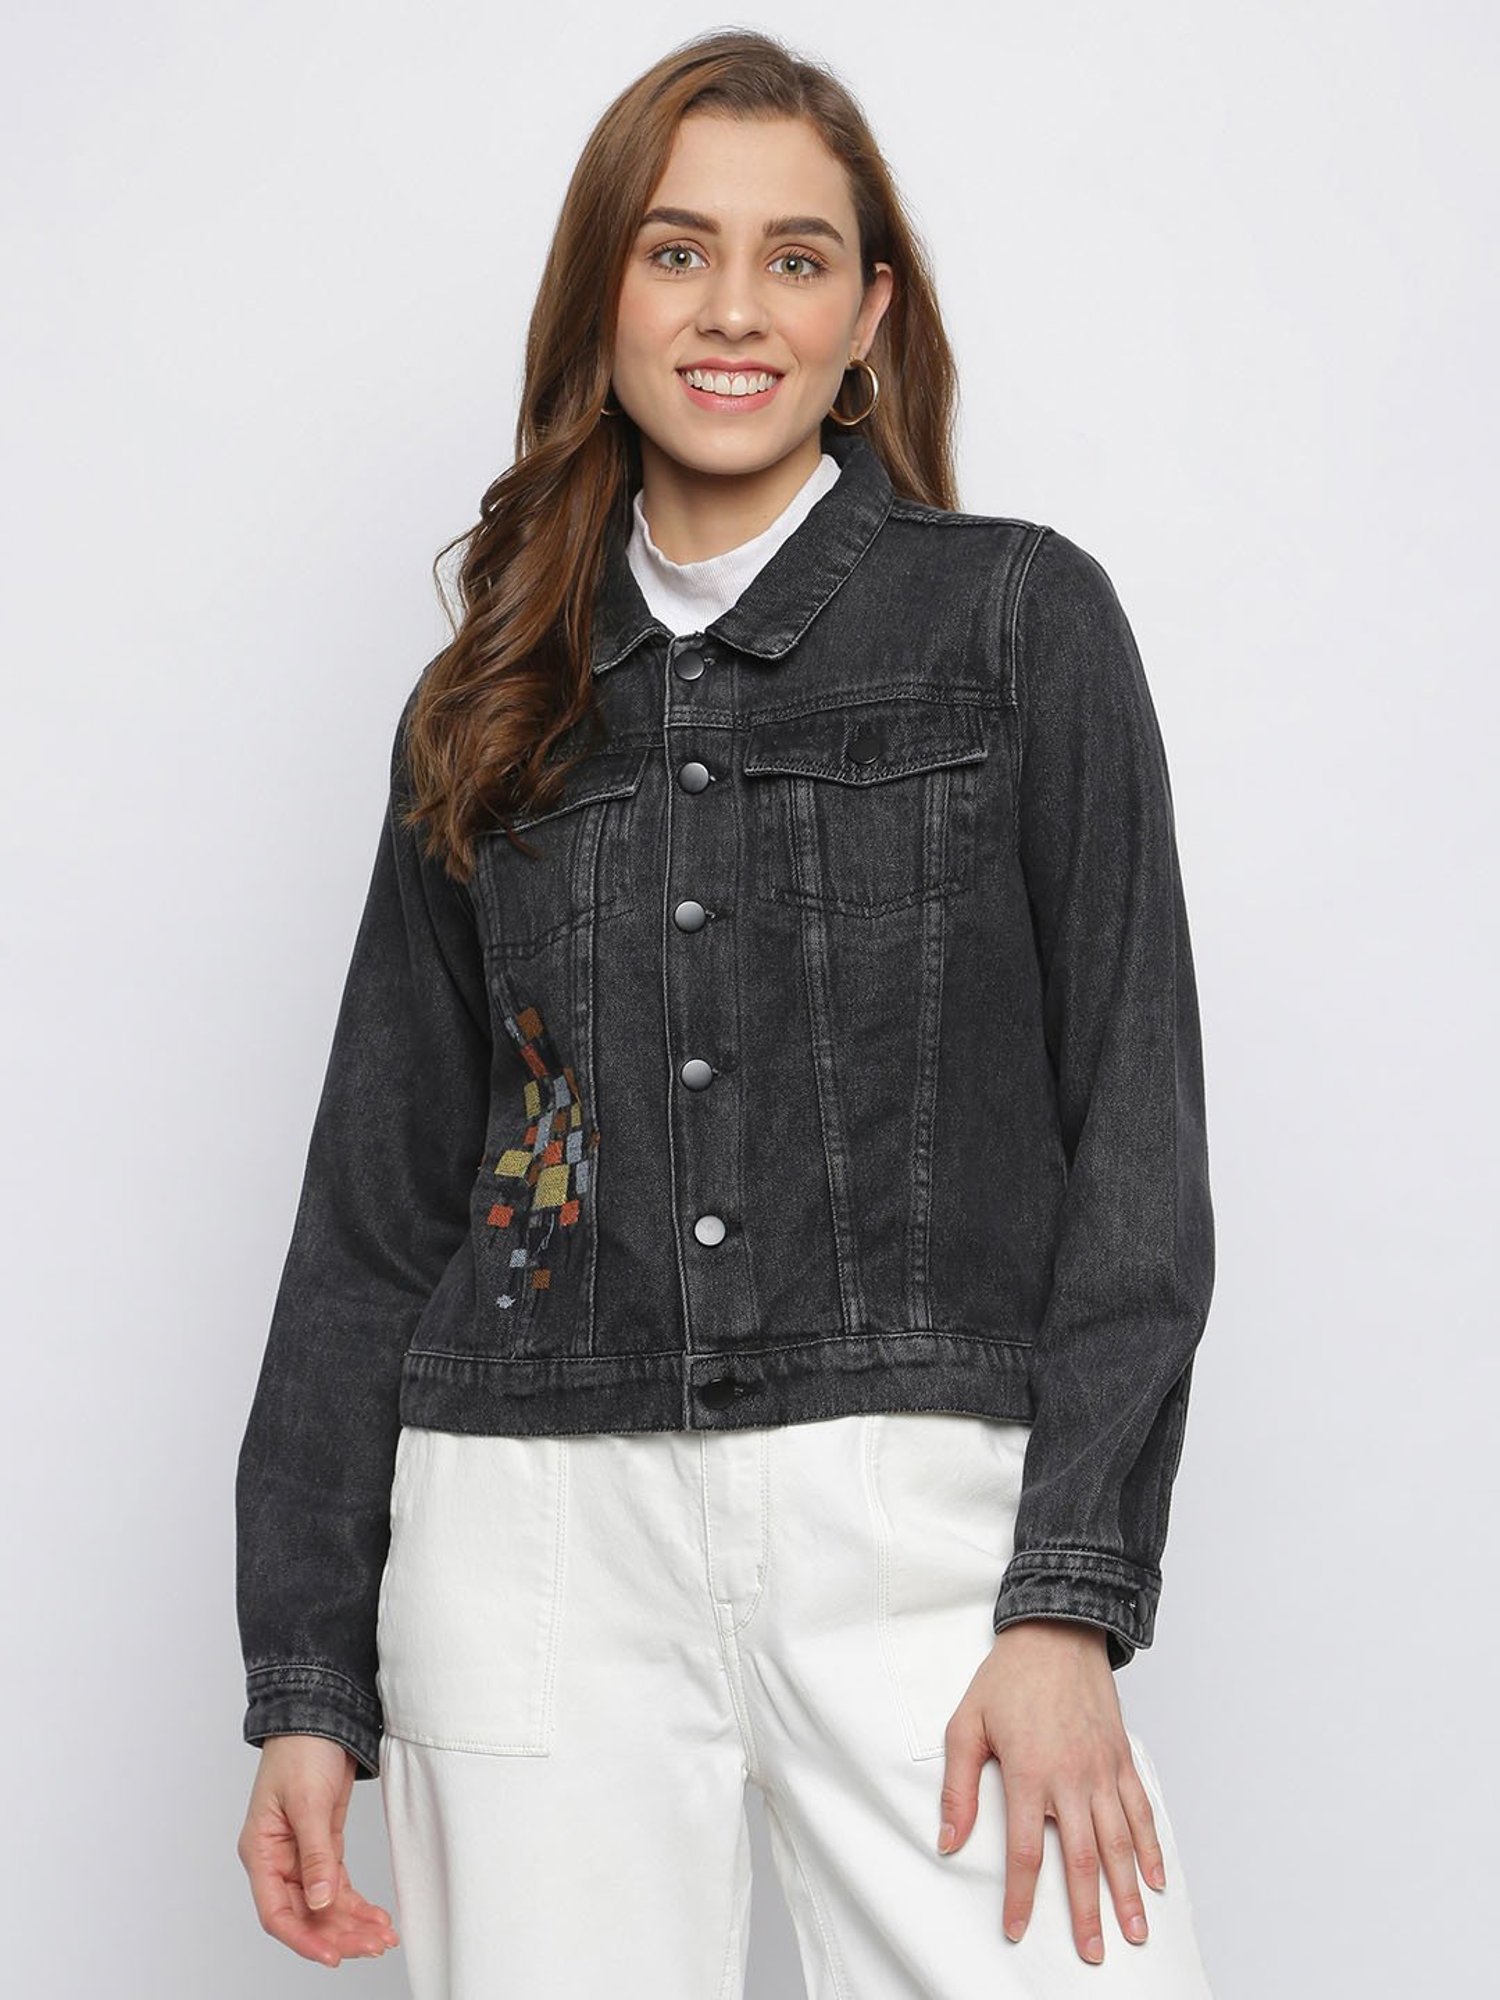 Tips on How to Wear a Jean Jacket with Any Outfit